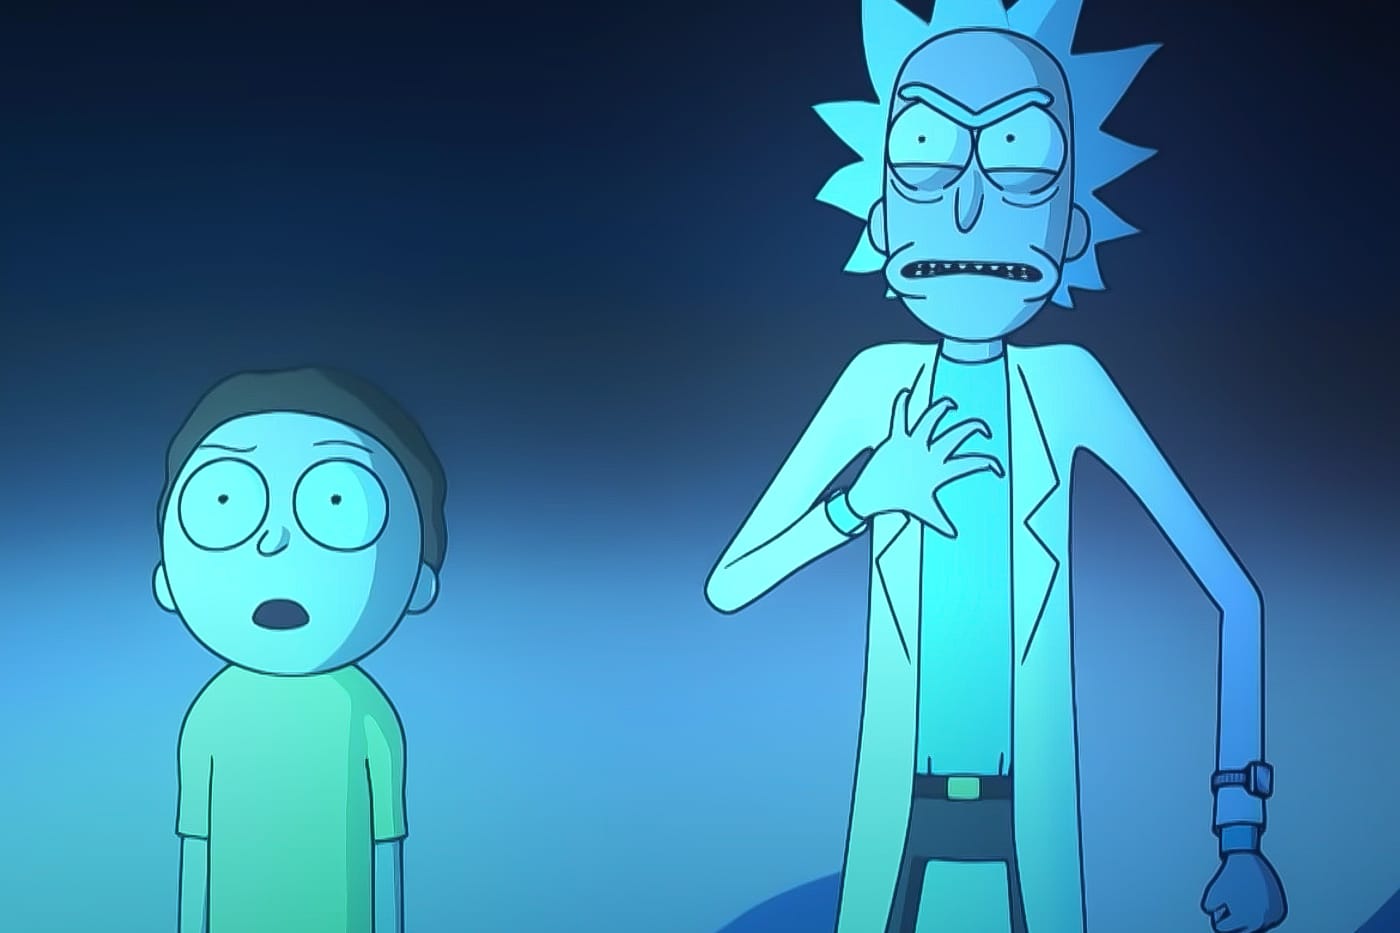 Related image  Rick and morty characters Rick and morty Morty